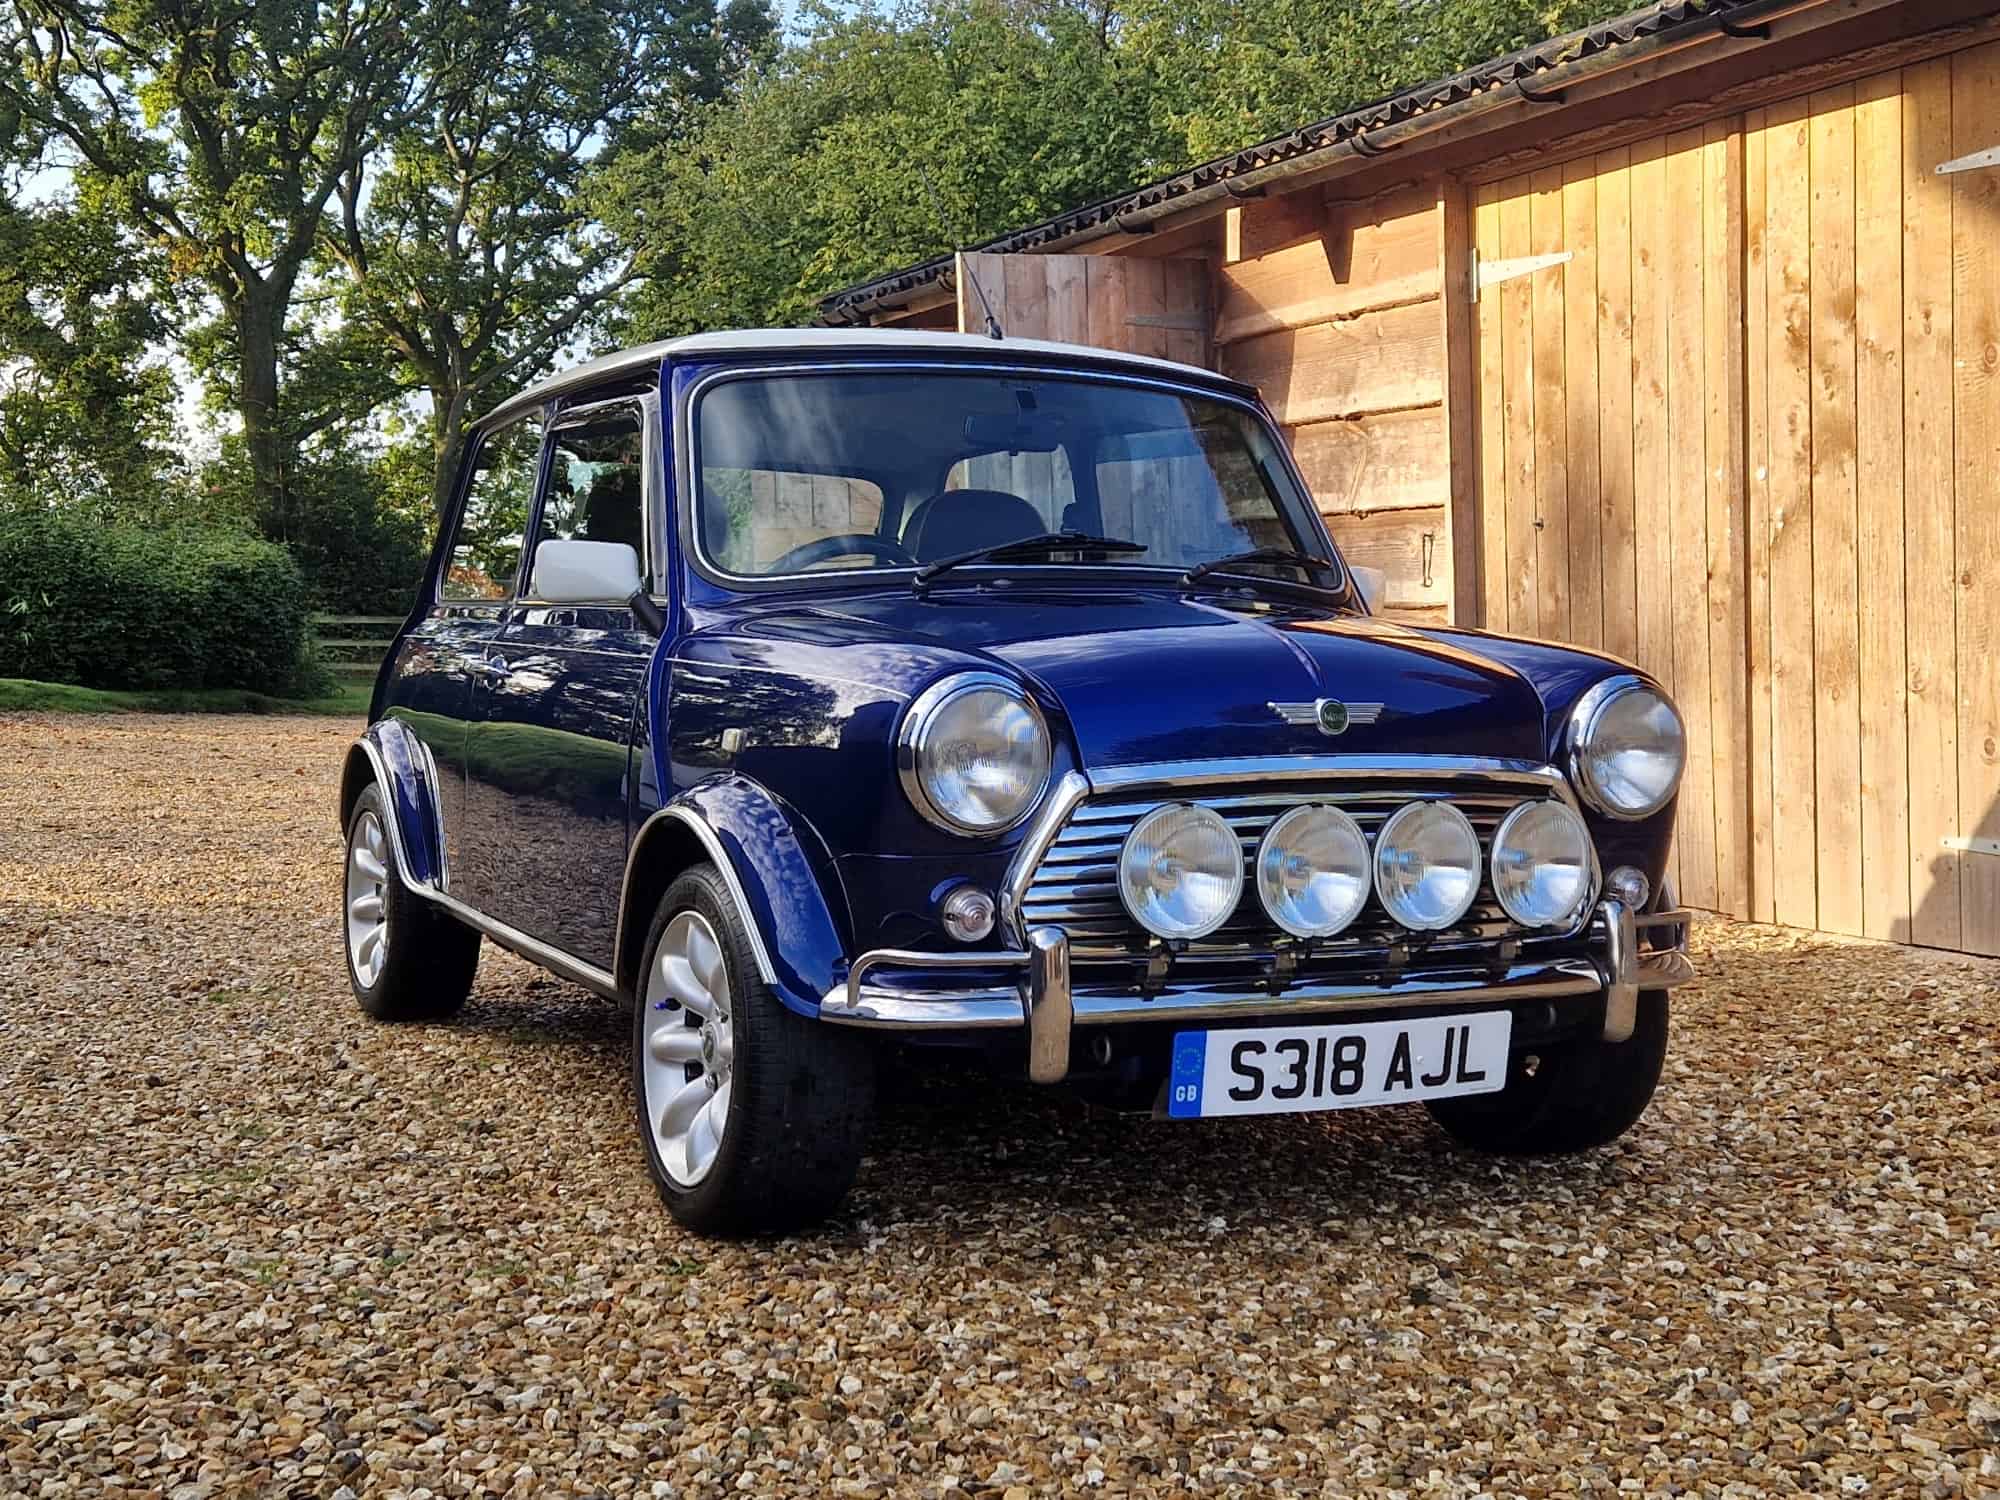 ** NOW SOLD ** 1998 Rover Mini 1275 cc Injection in Immaculate Condition Throughout.